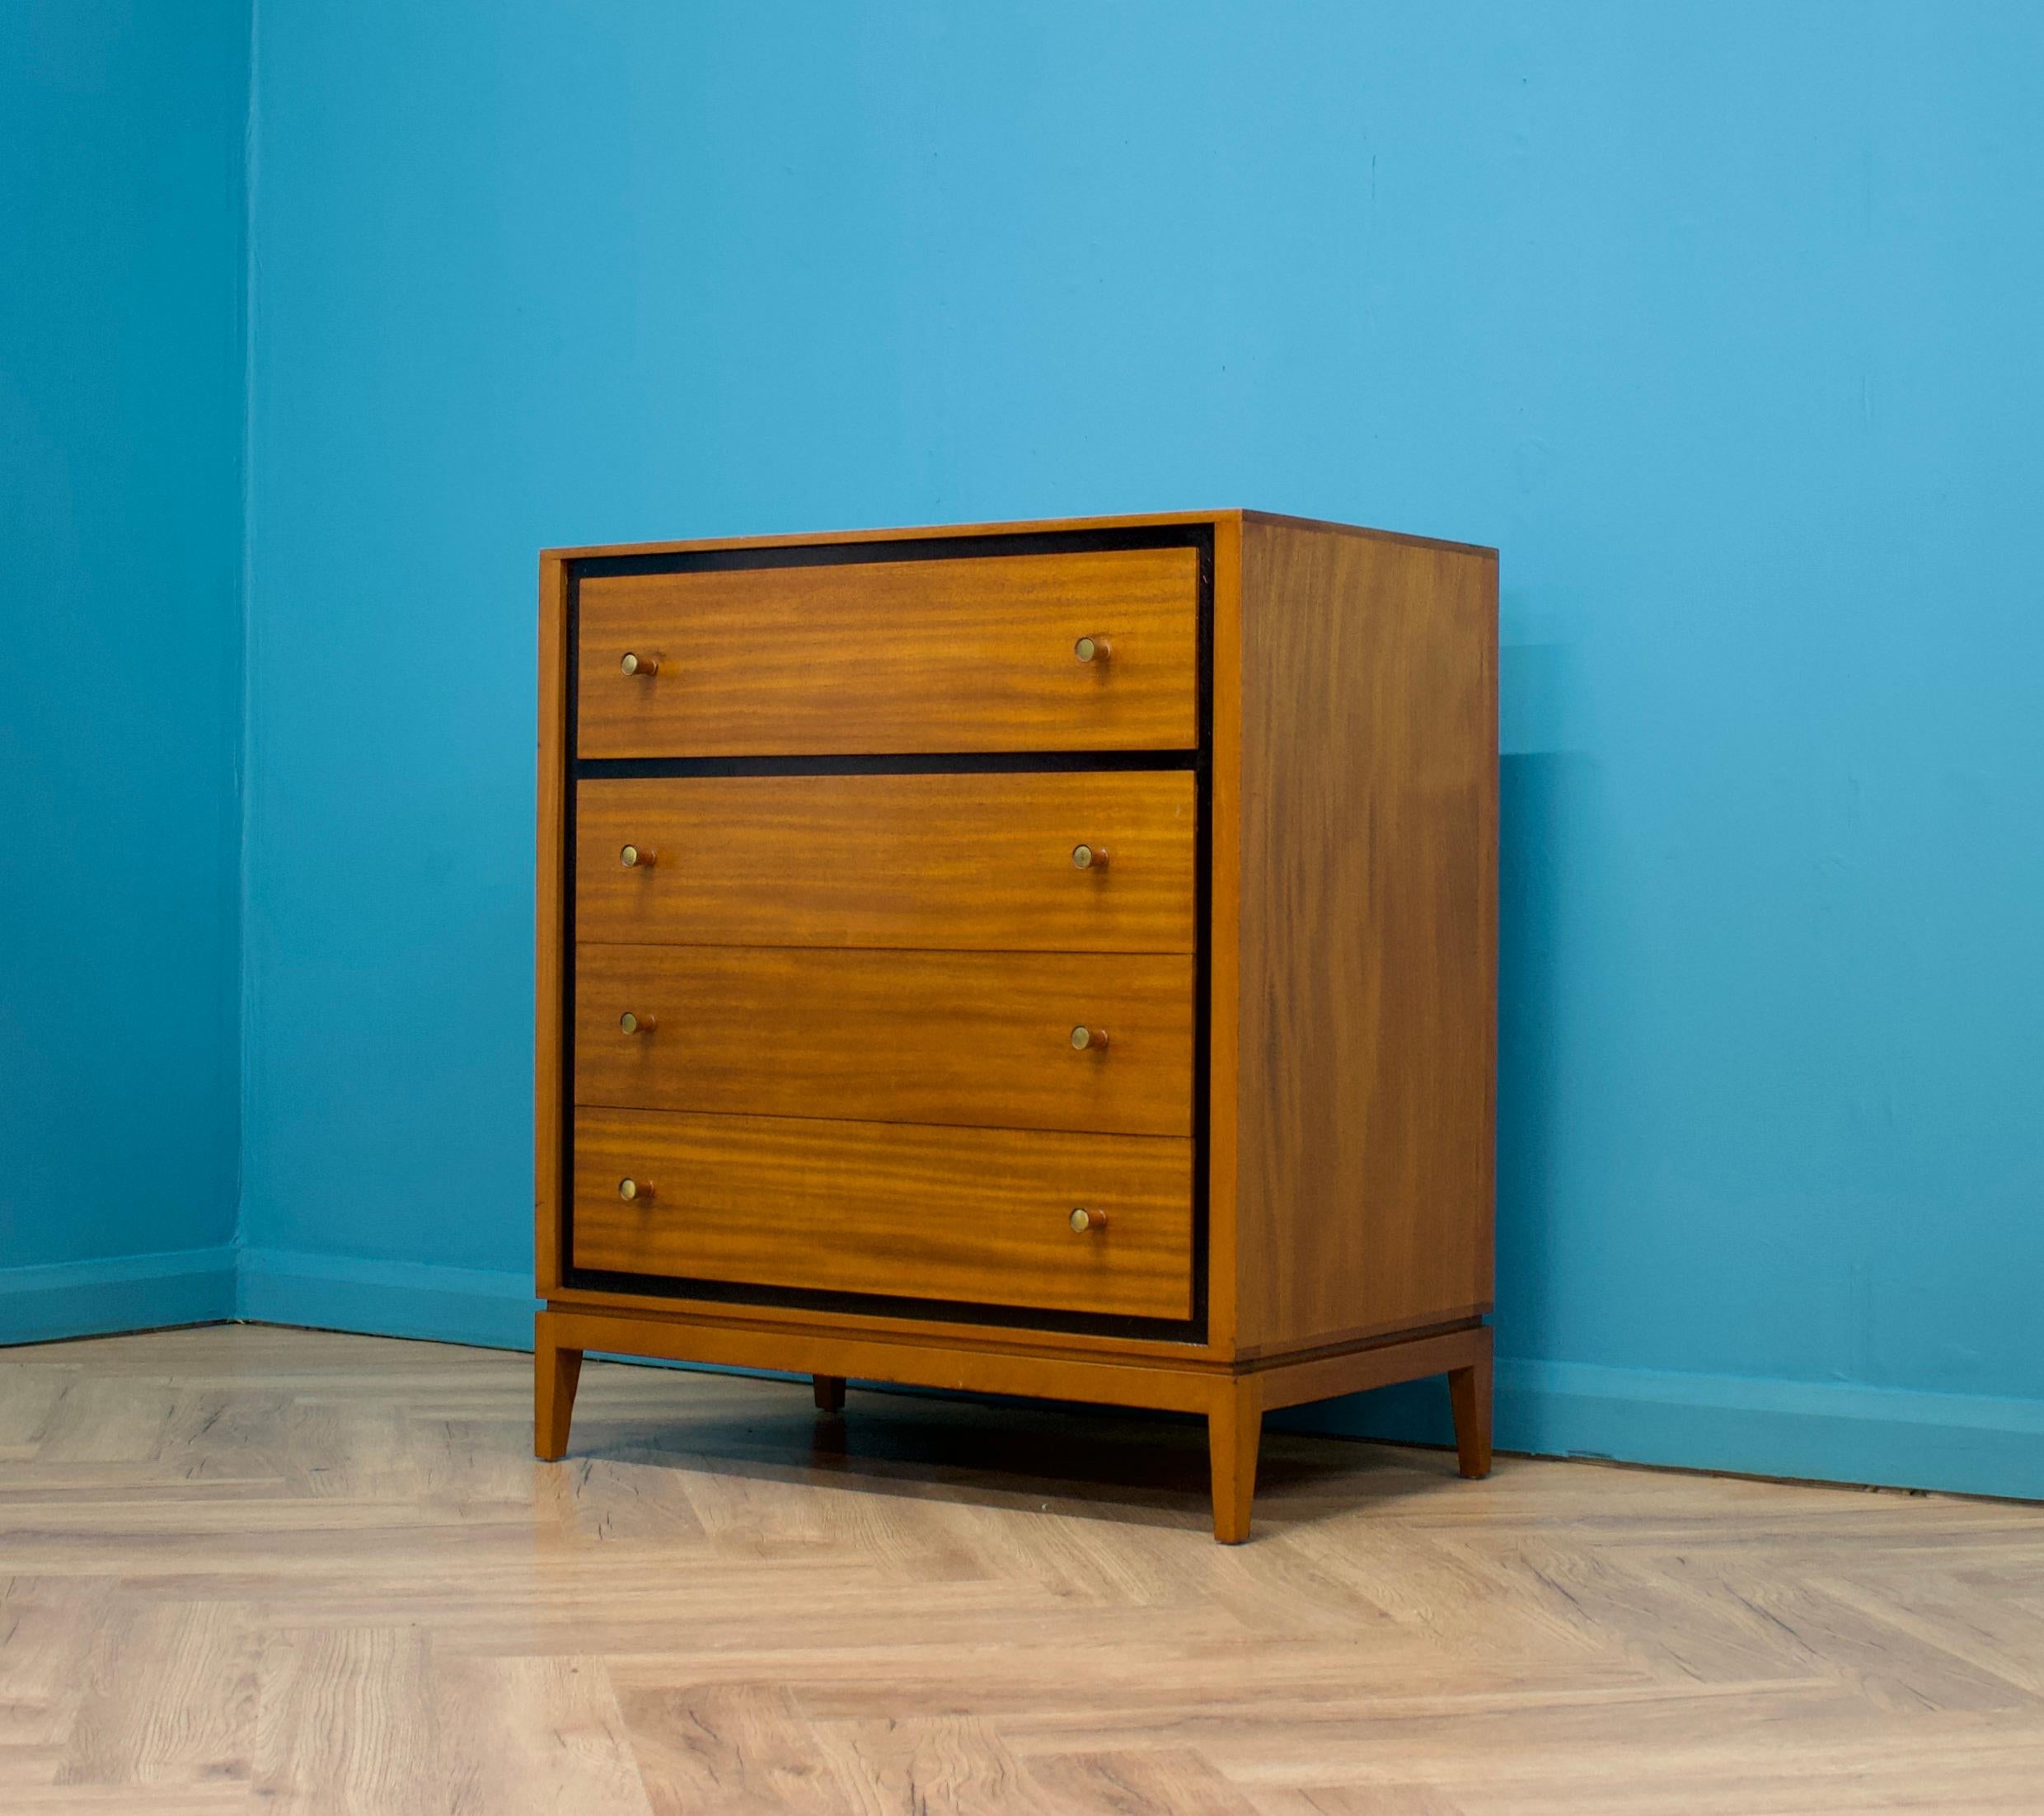 British Mid-Century Teak Chest of Drawers by Heals from Loughborough, 1950s For Sale